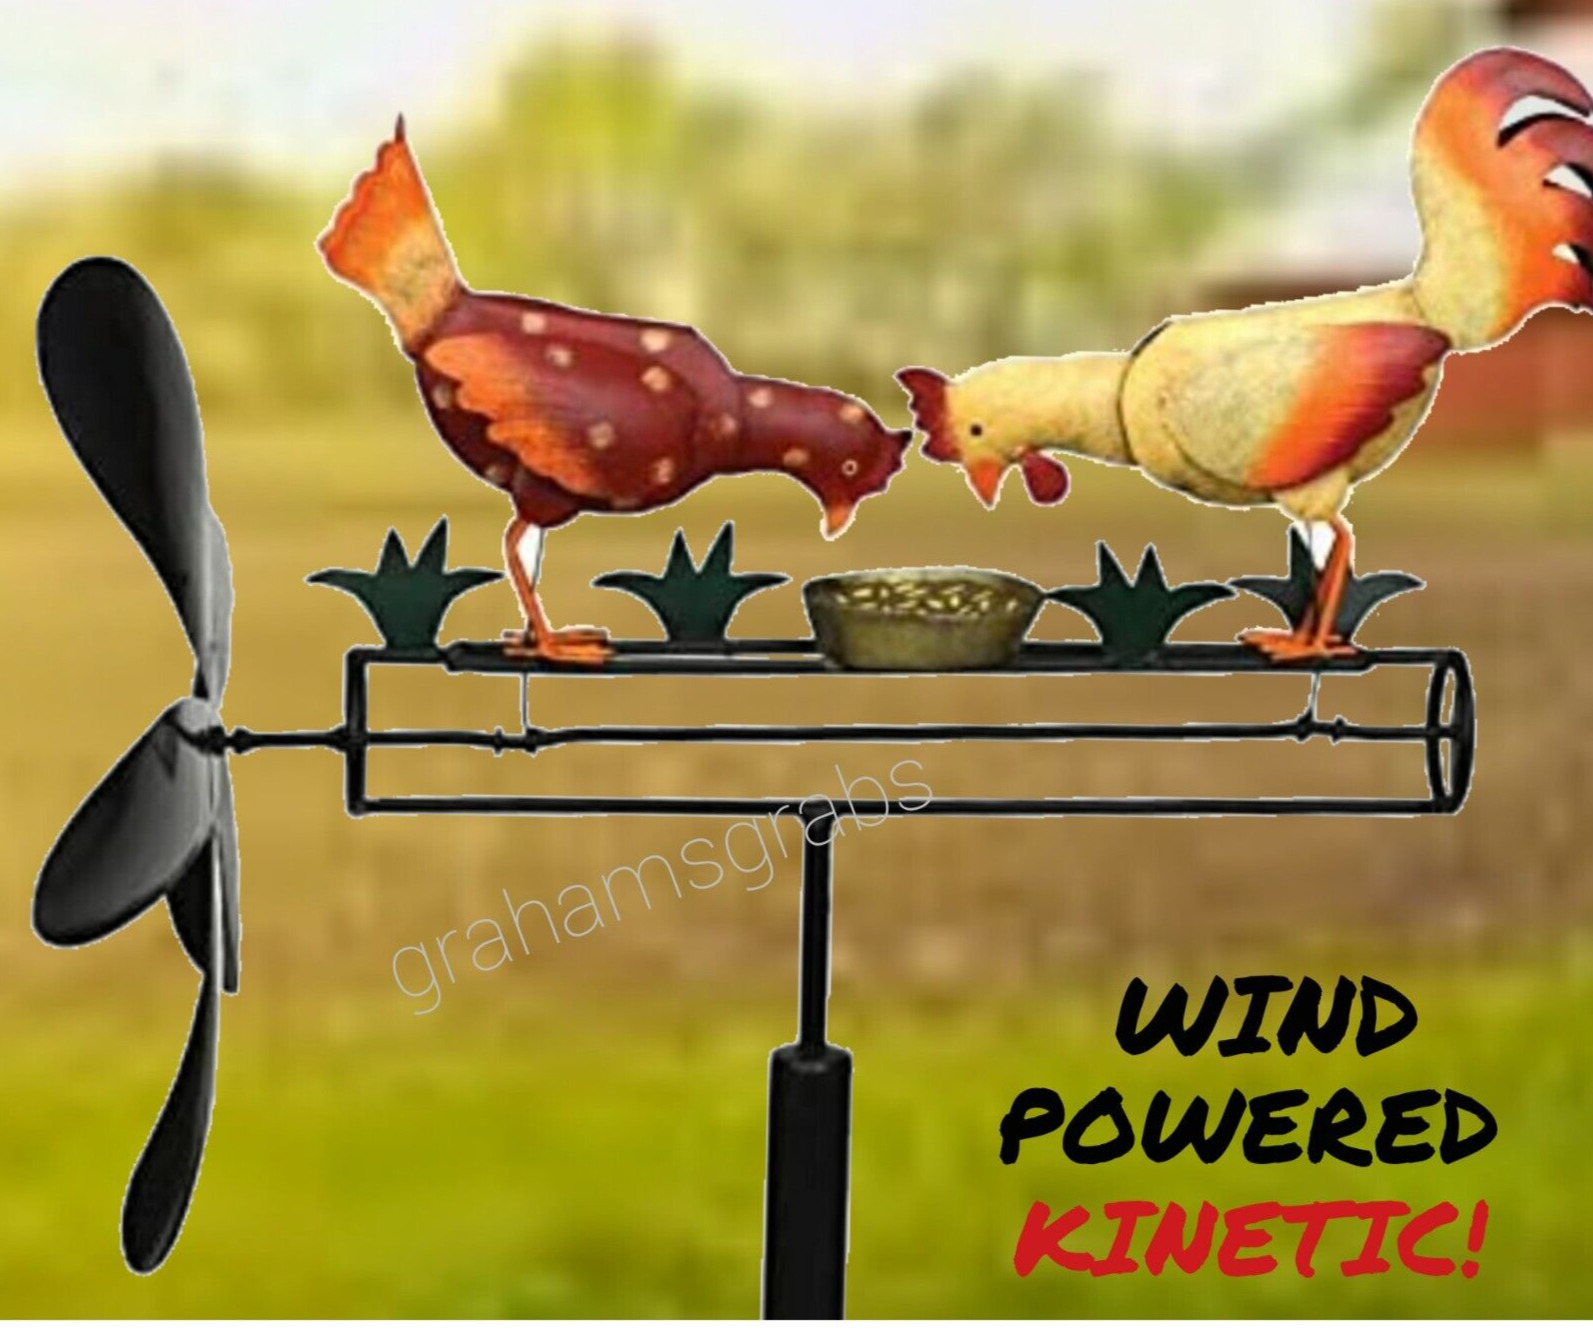 NEW PECKING CHICKEN & ROOSTER WHIRLIGIG  WIND POWERED KINETIC YARD DECOR SPINNER